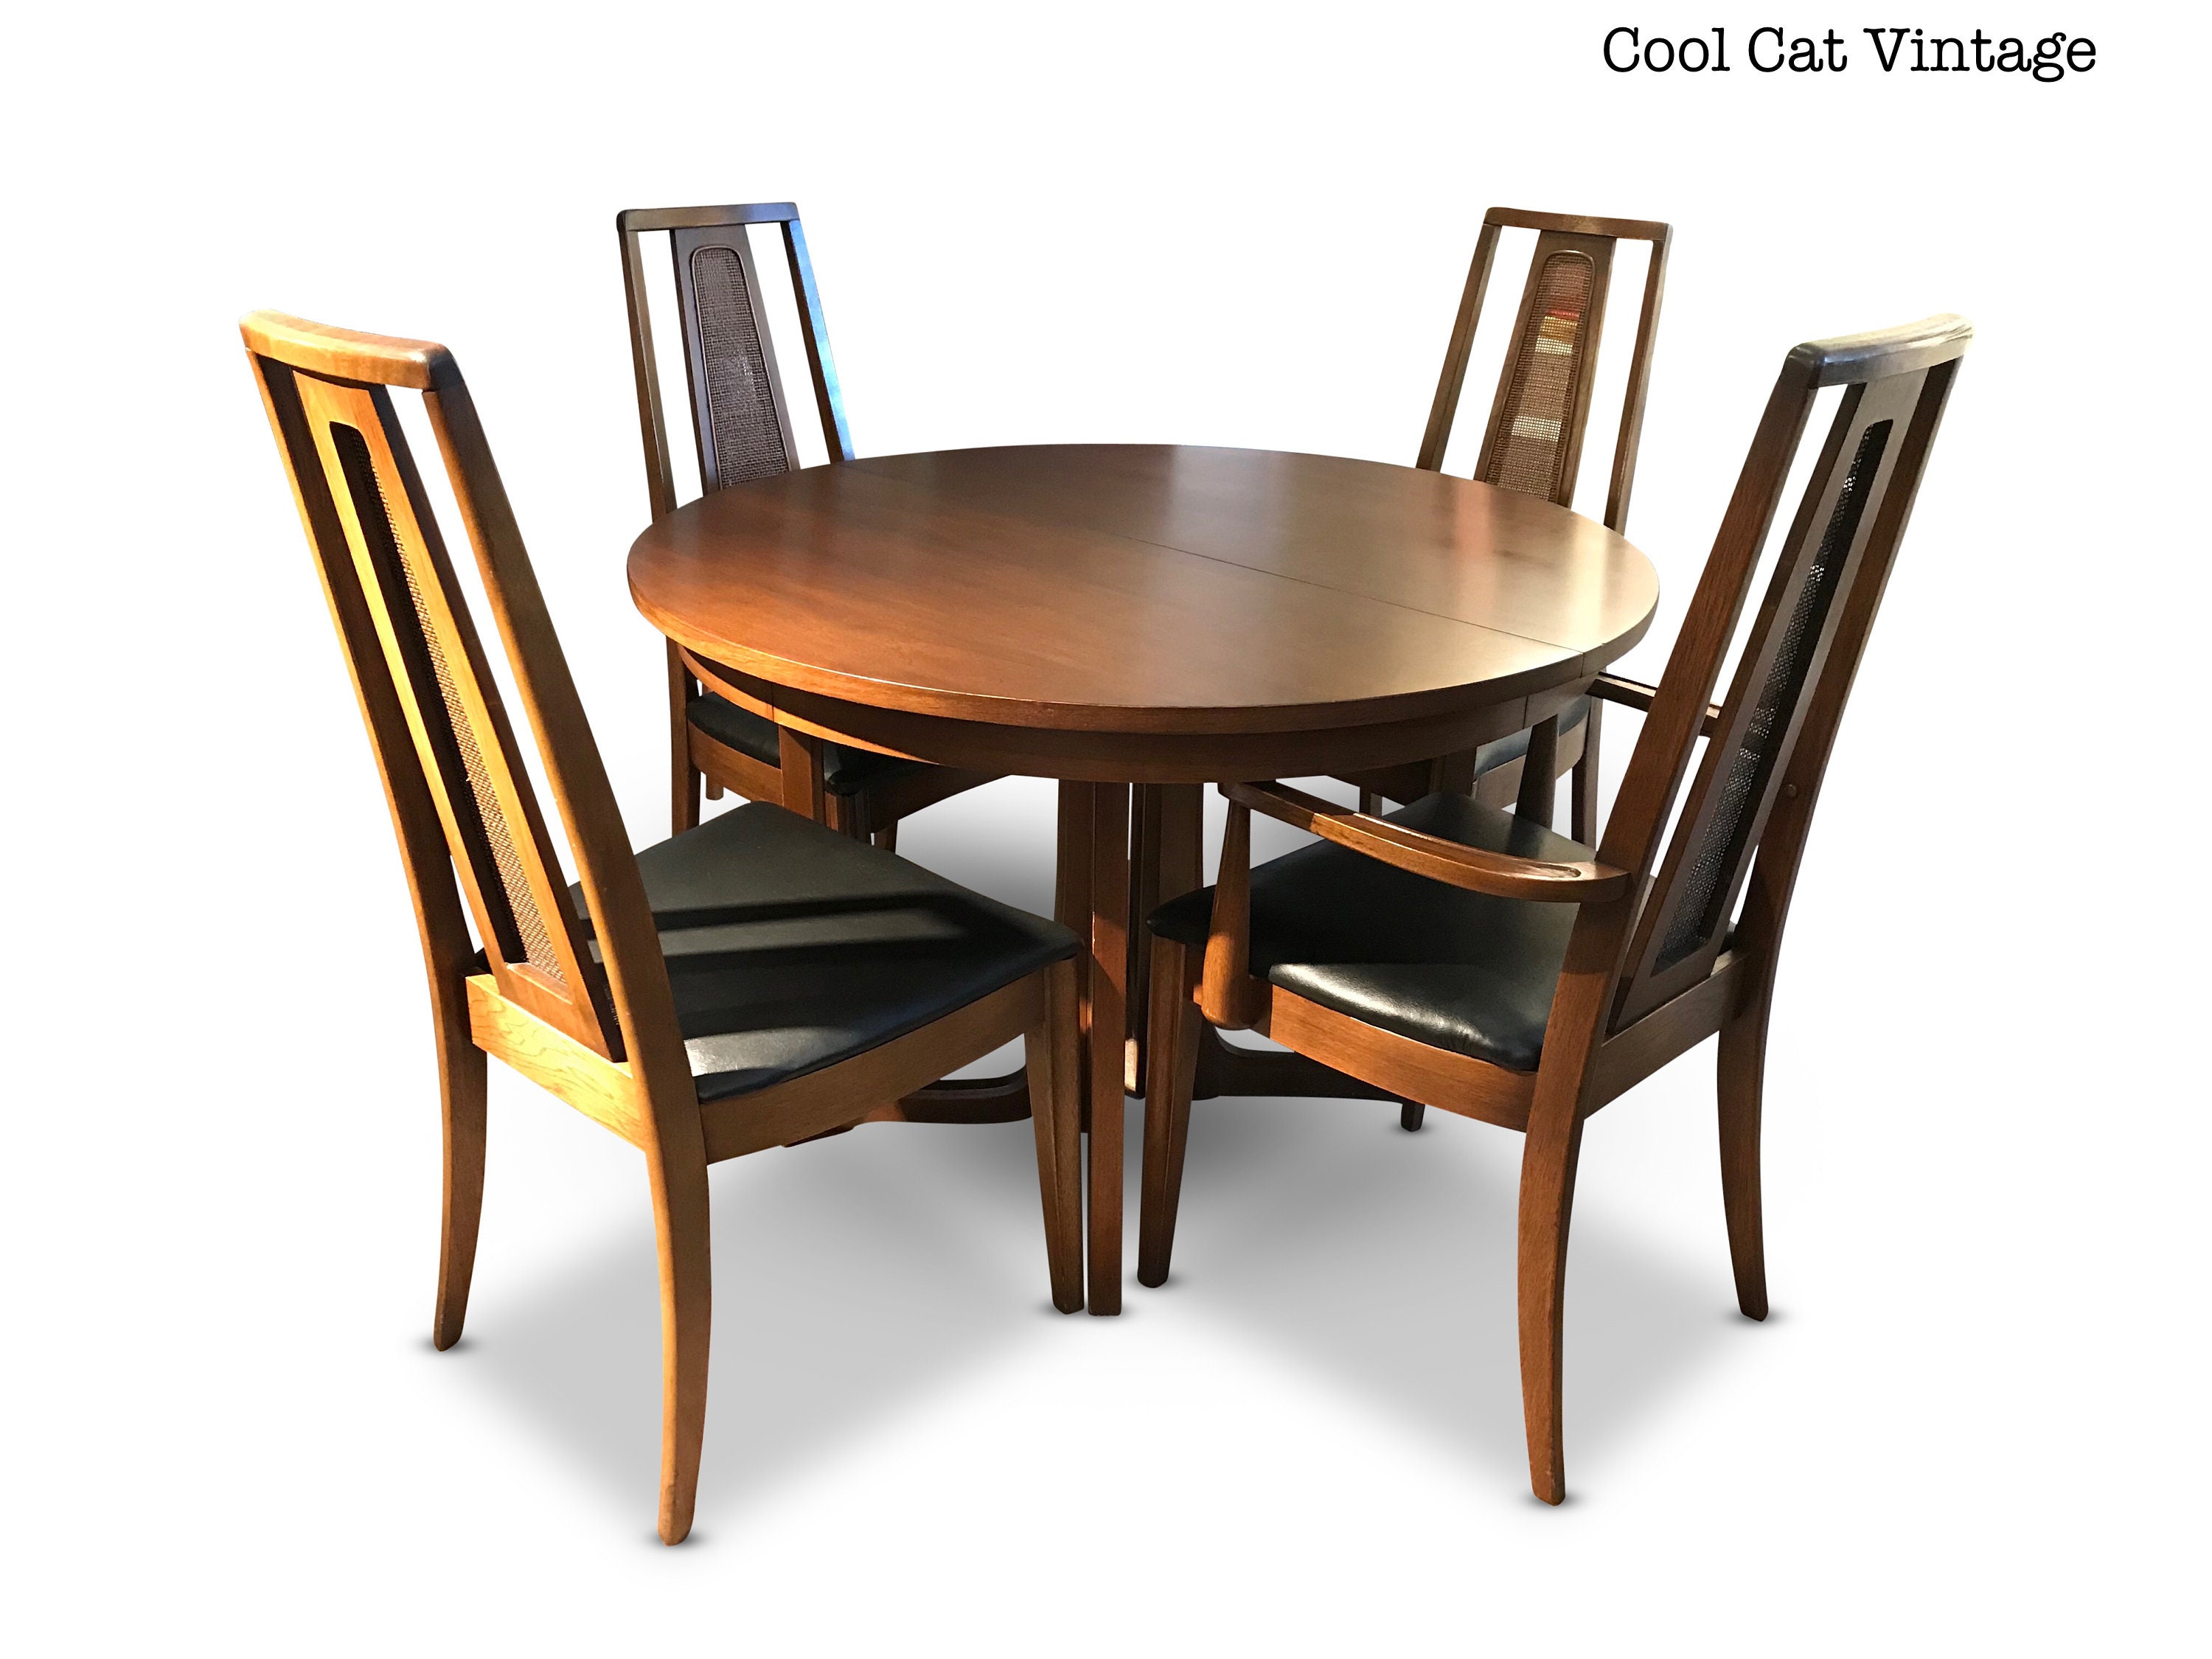 Broyhill Emphasis Walnut Pedestal Dining Table And 4 Chairs Please See Notes On Shipping Before You Purchase